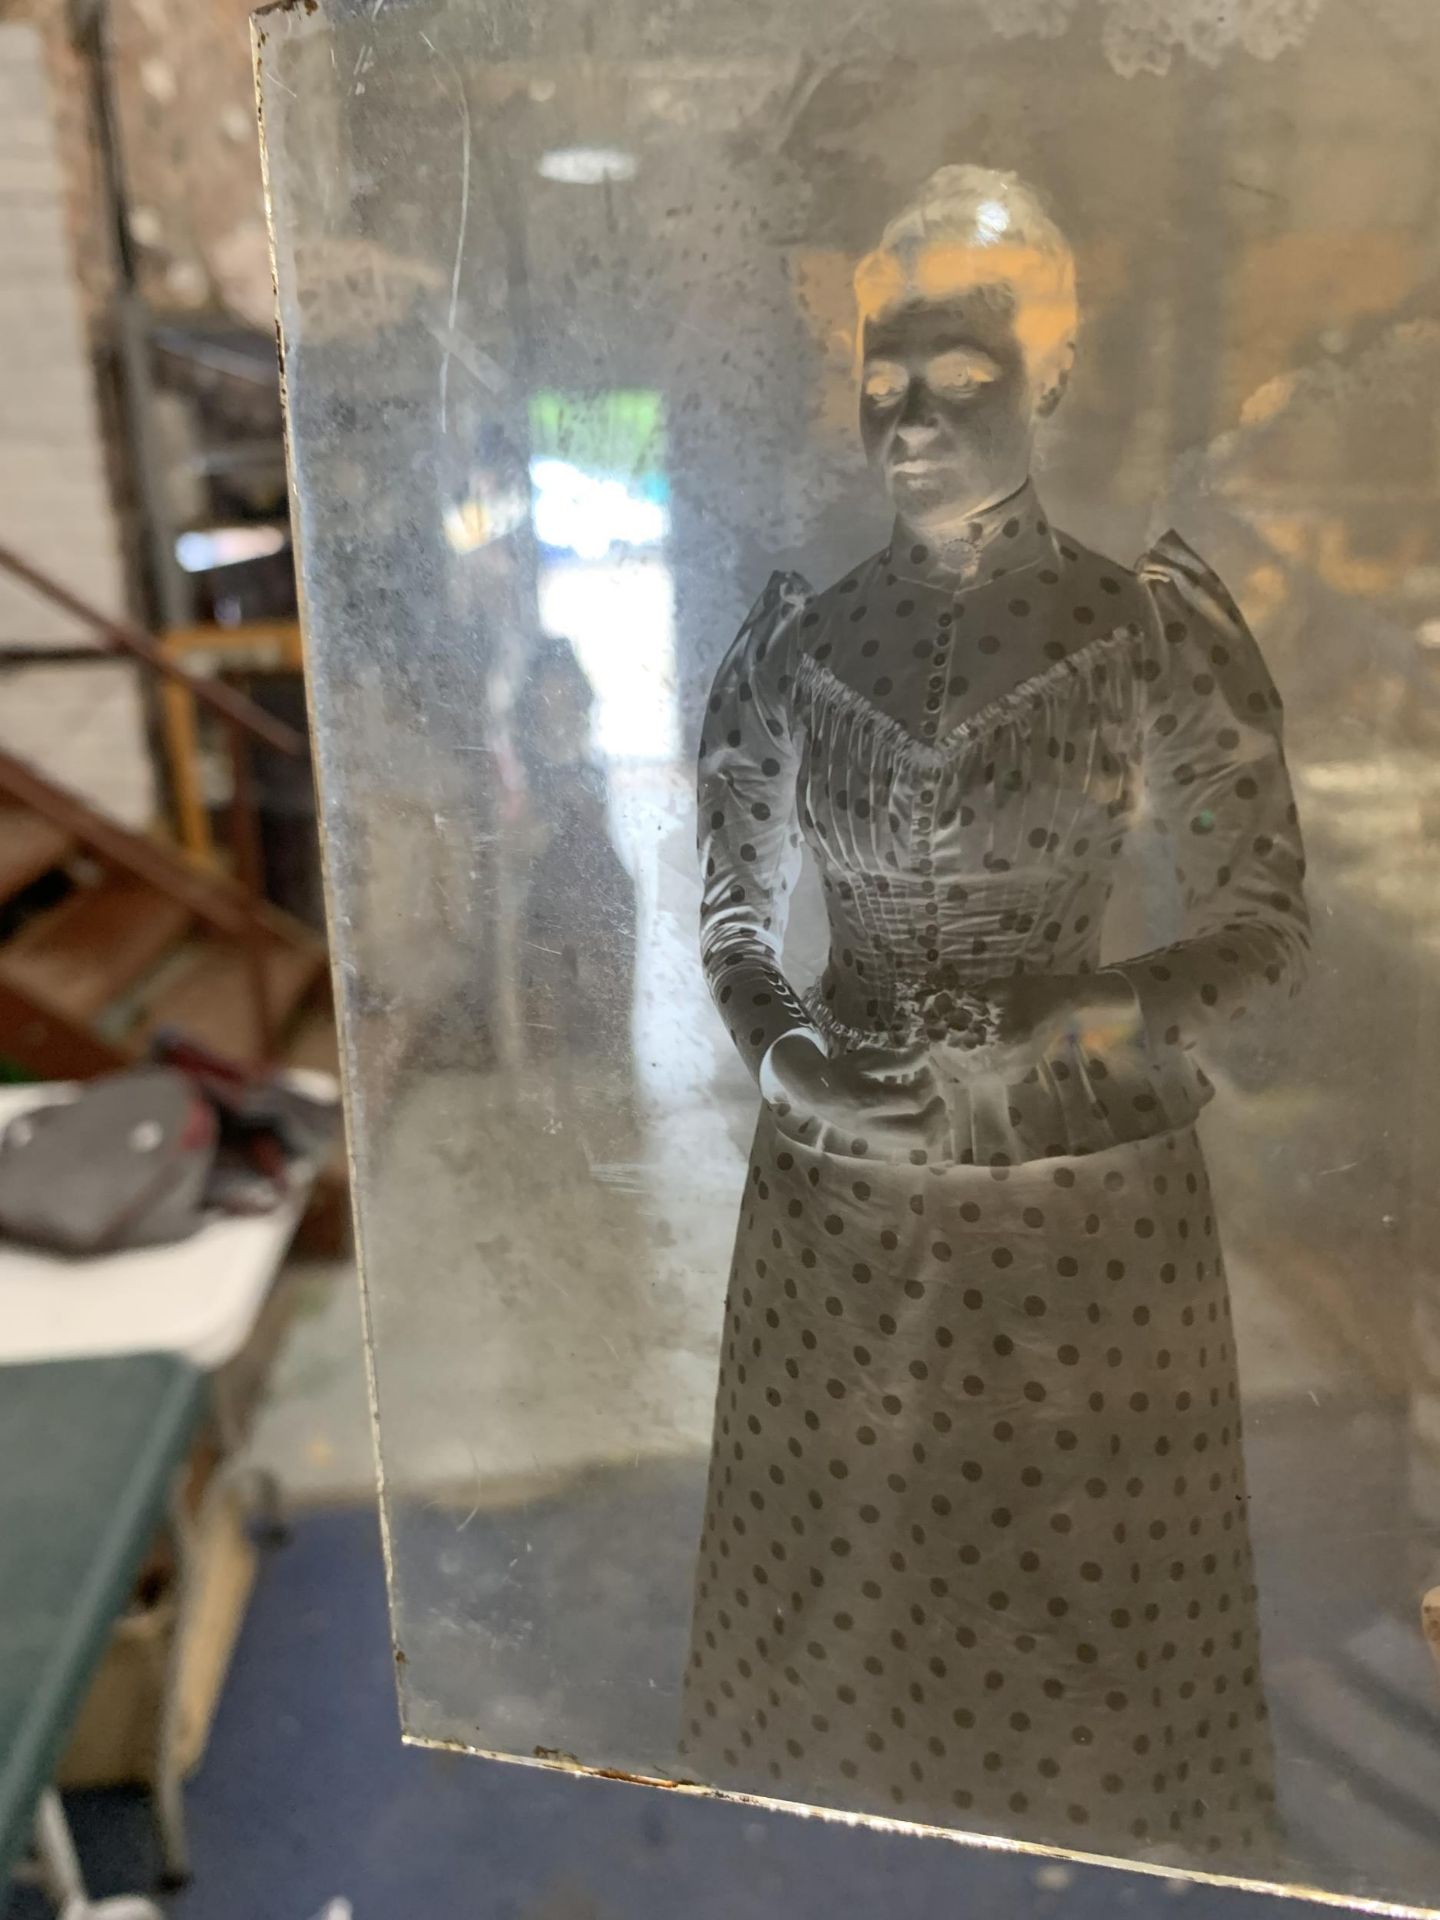 A COLLECTION OF GLASS ILFORD DRY PLATES WITH PHOTOGRAPHIC IMAGES ON THEM - Image 4 of 5